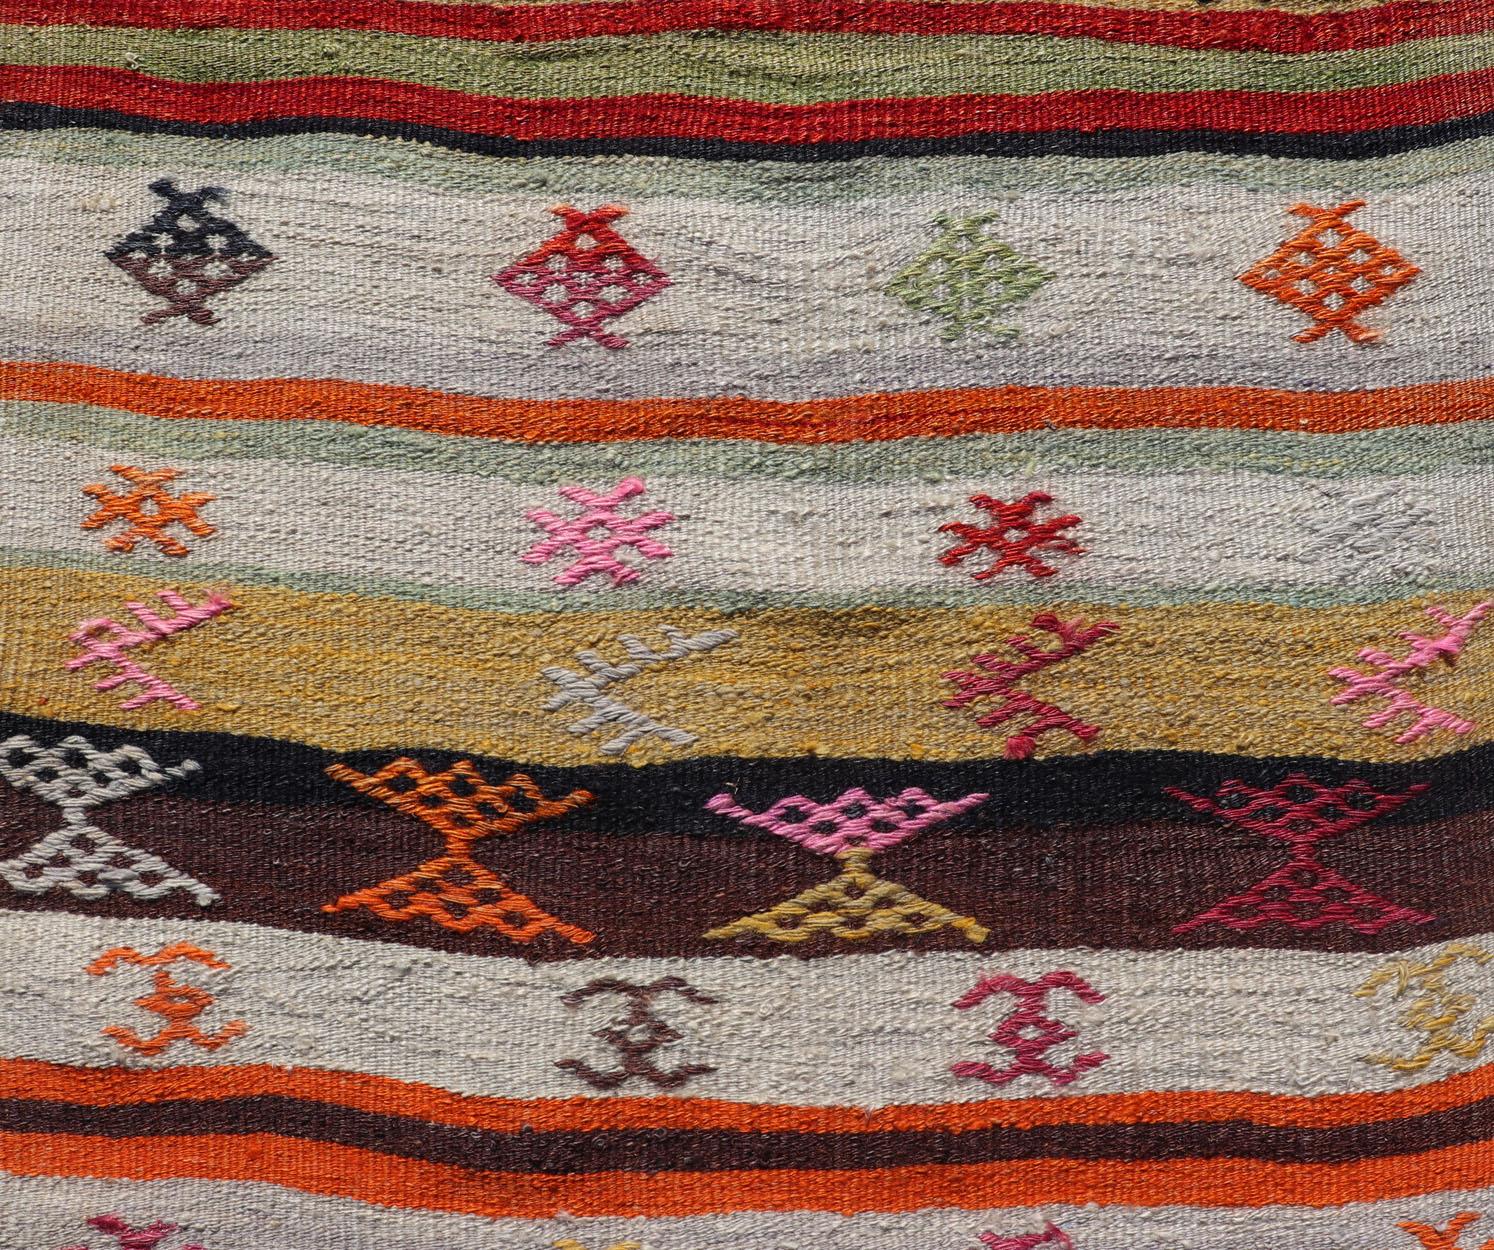 Hand-Woven Vintage Hand Woven Turkish Kilim Colorful Stripe Runner with Tribal Motifs For Sale